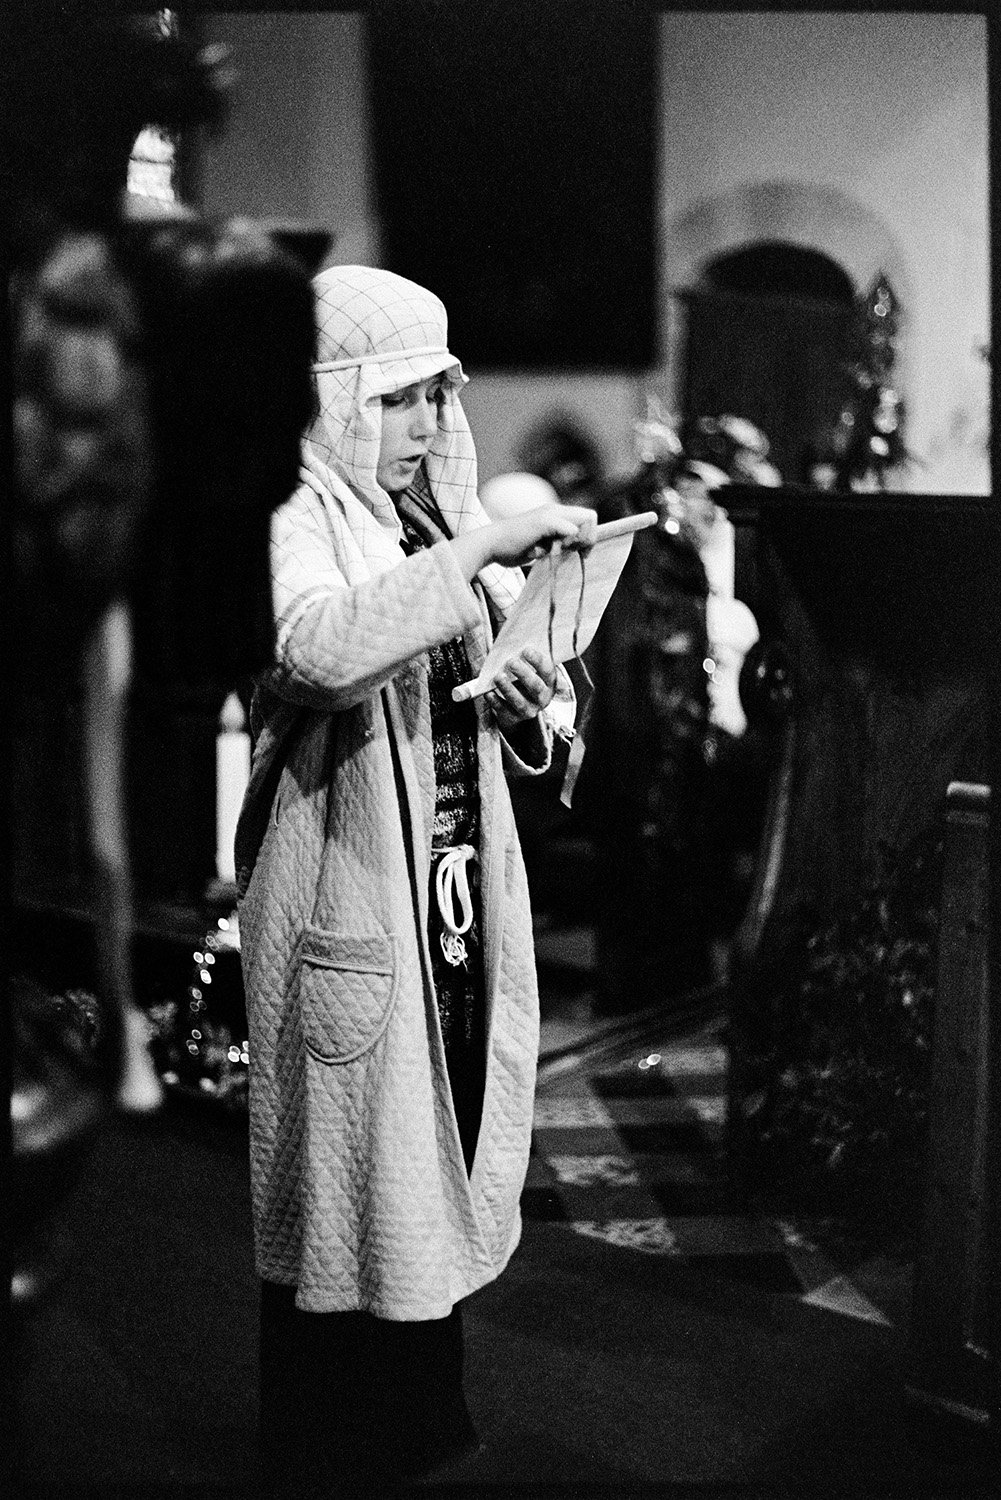 Nativity play, children in church. 
[A child giving a reading as part of a nativity play in Dolton Church. The child is dressed as a shepherd.]